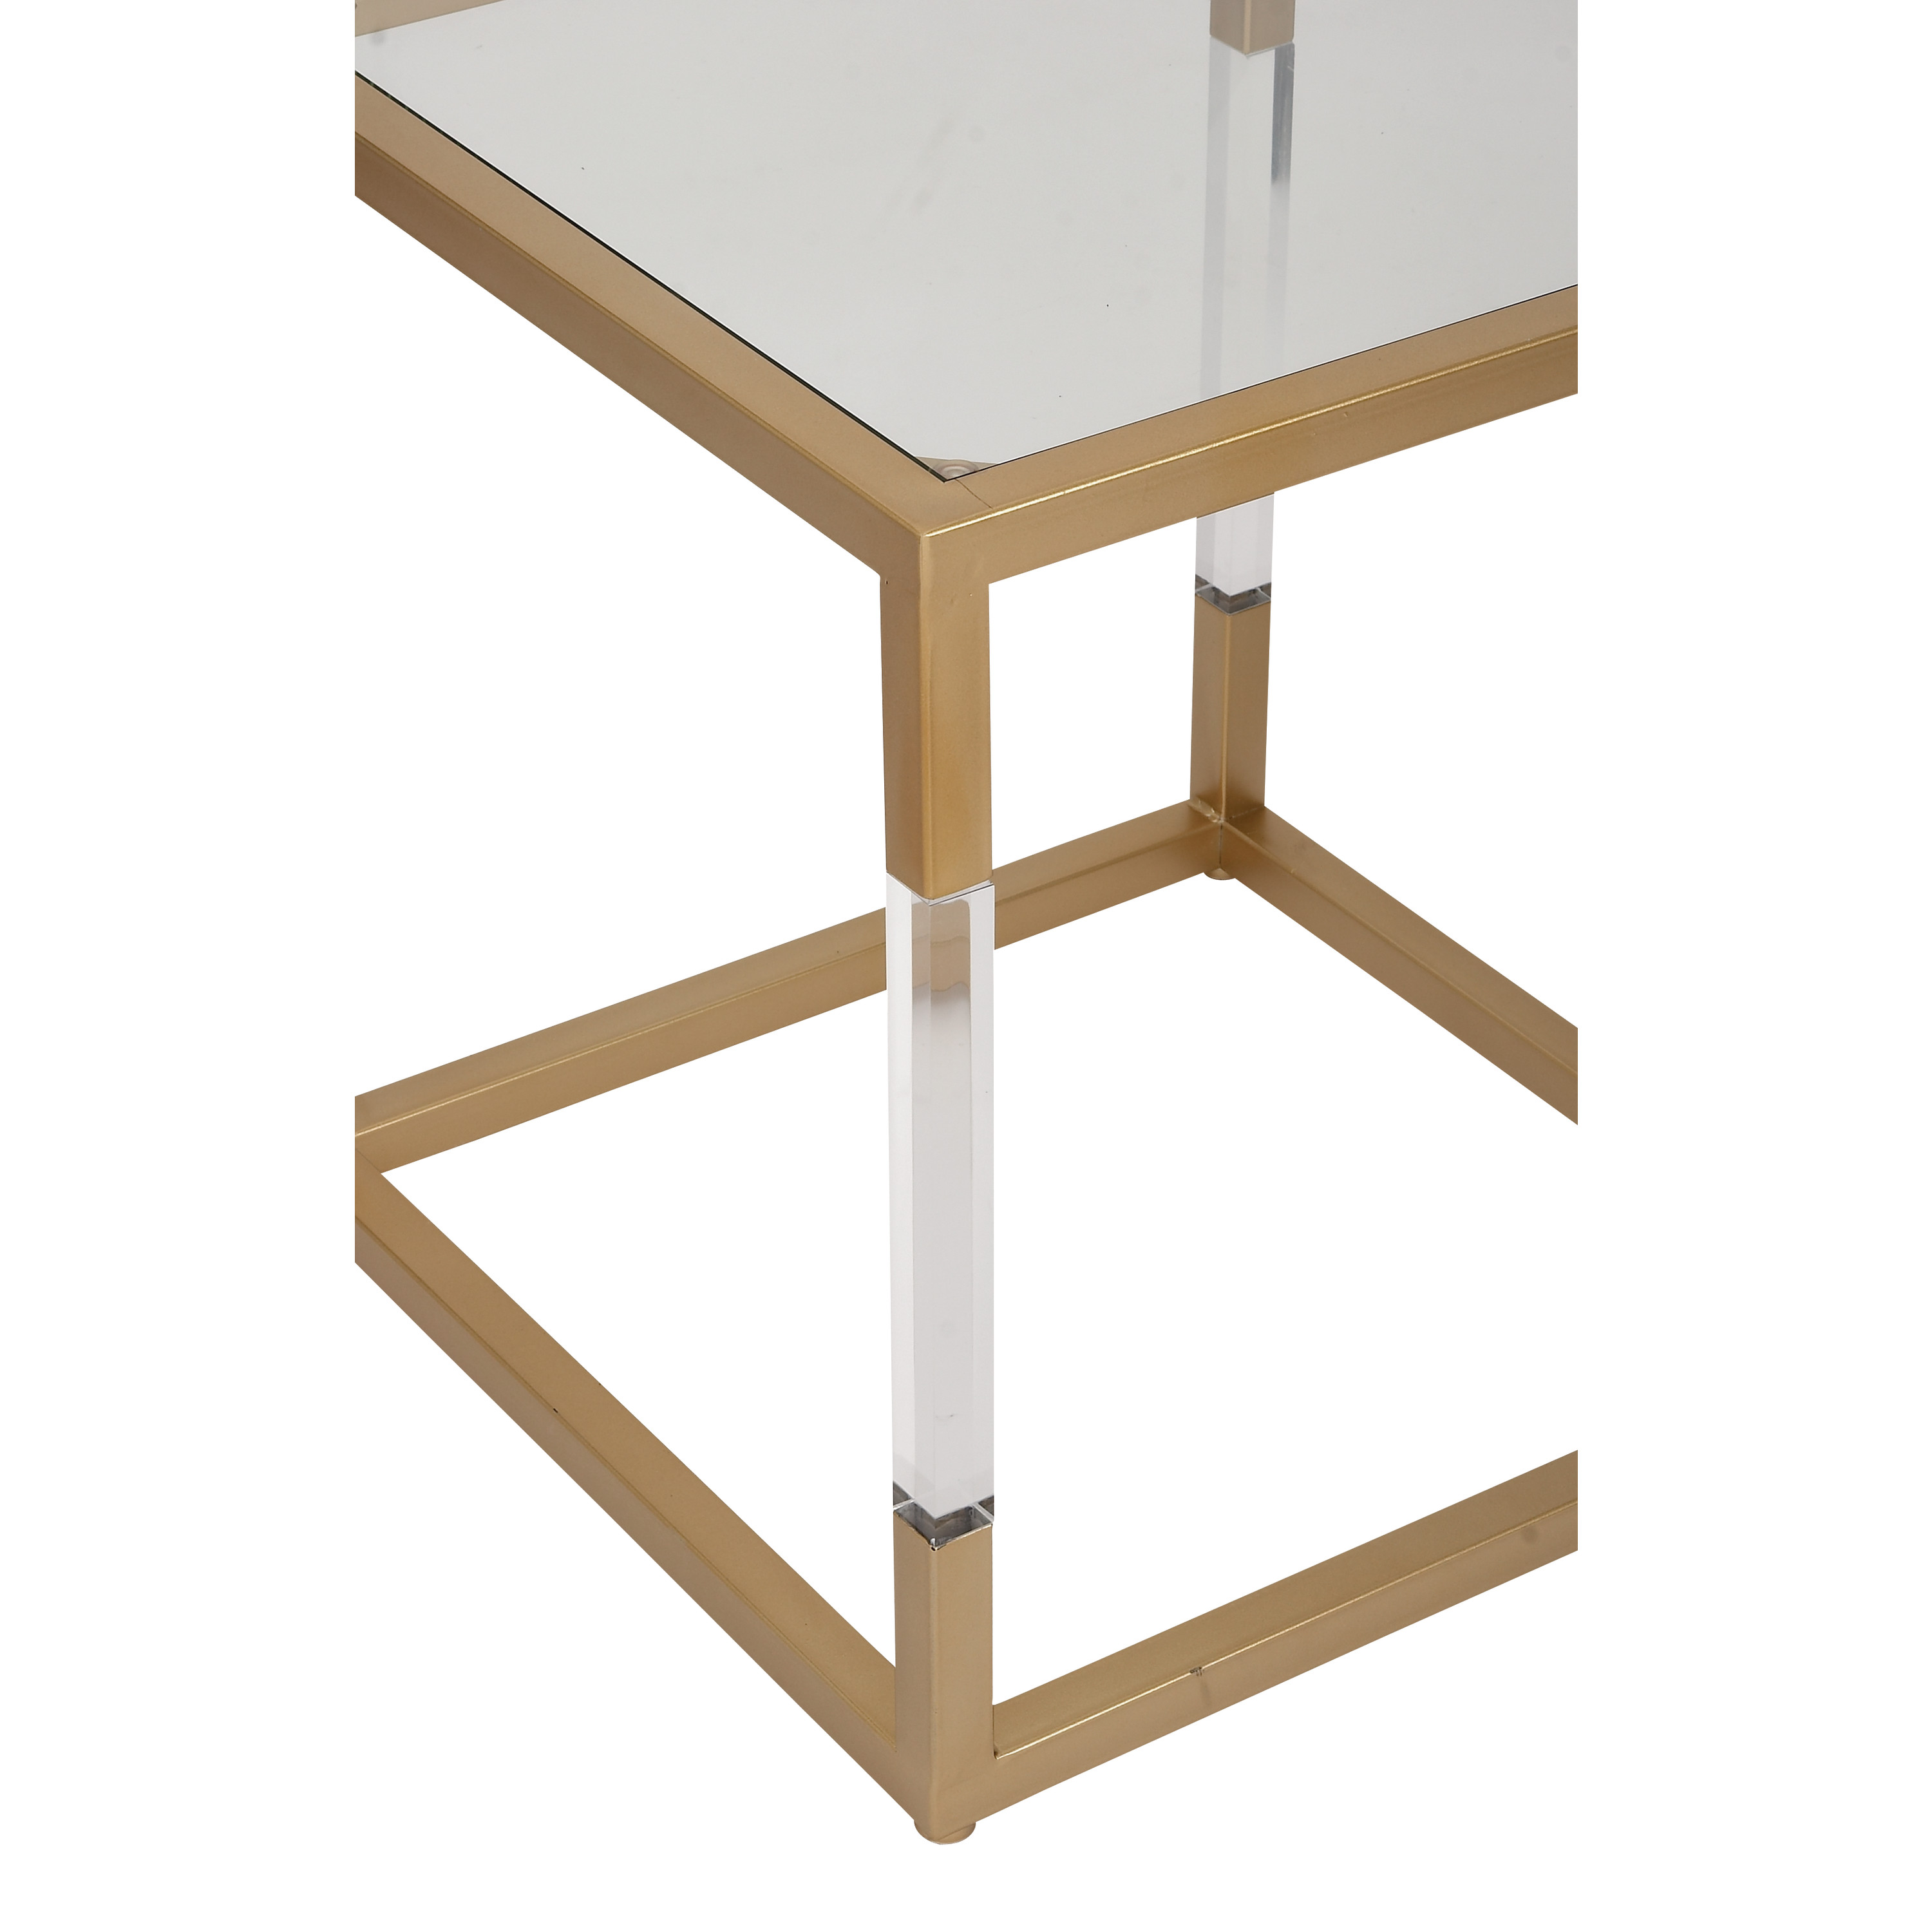 DecMode 19" x 20" Gold Metal Accent Table with Clear Glass Top and Acrylic Legs, 1-Piece - image 5 of 7